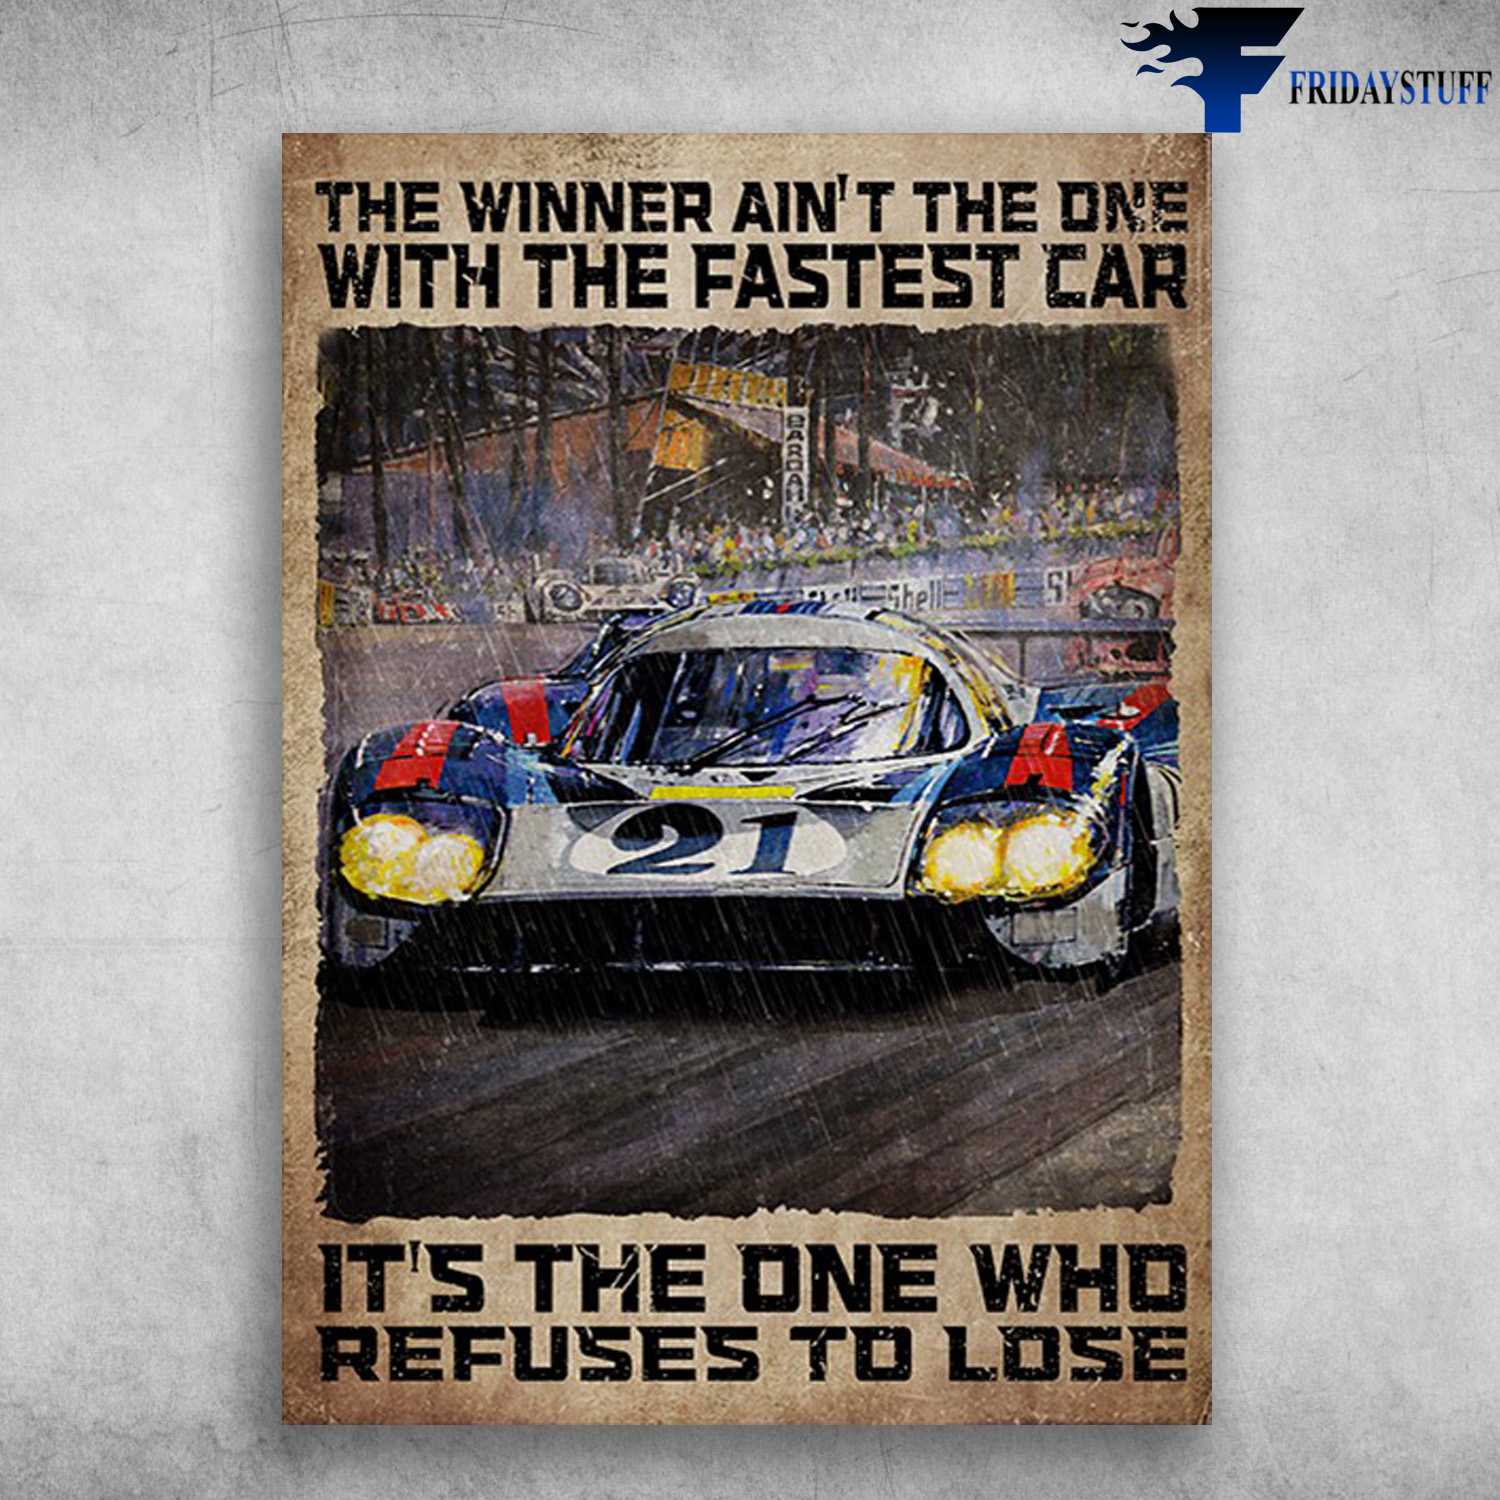 Racing Car, Fastest Car - The Winner Ain't The One, With The Fastest Car, It's The One Who Refuses To Lose